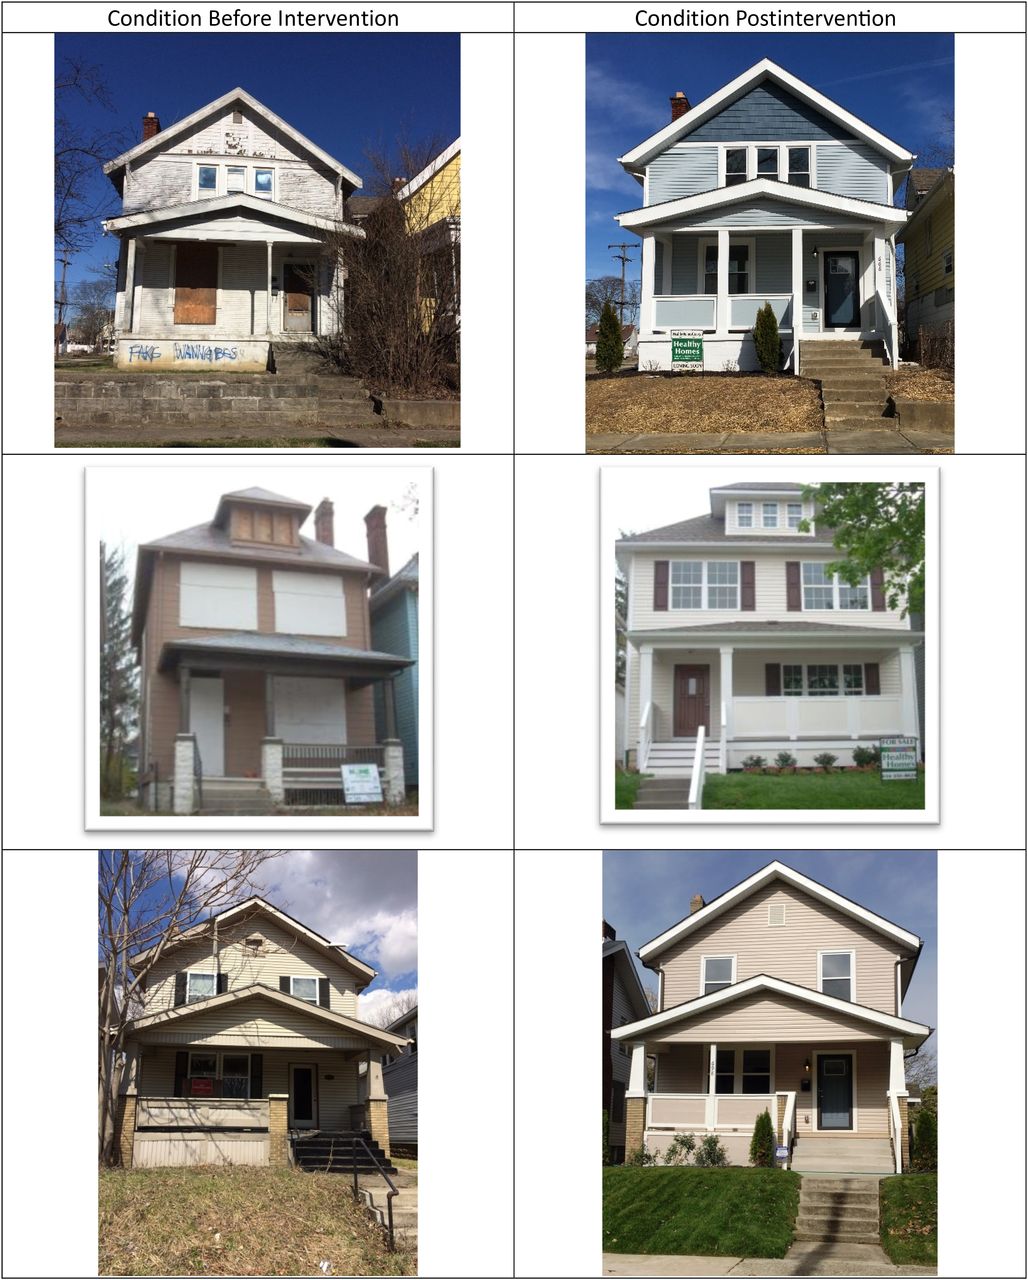 Homes before and after renovations through Health Neighborhoods Healthy Families Initiative. 